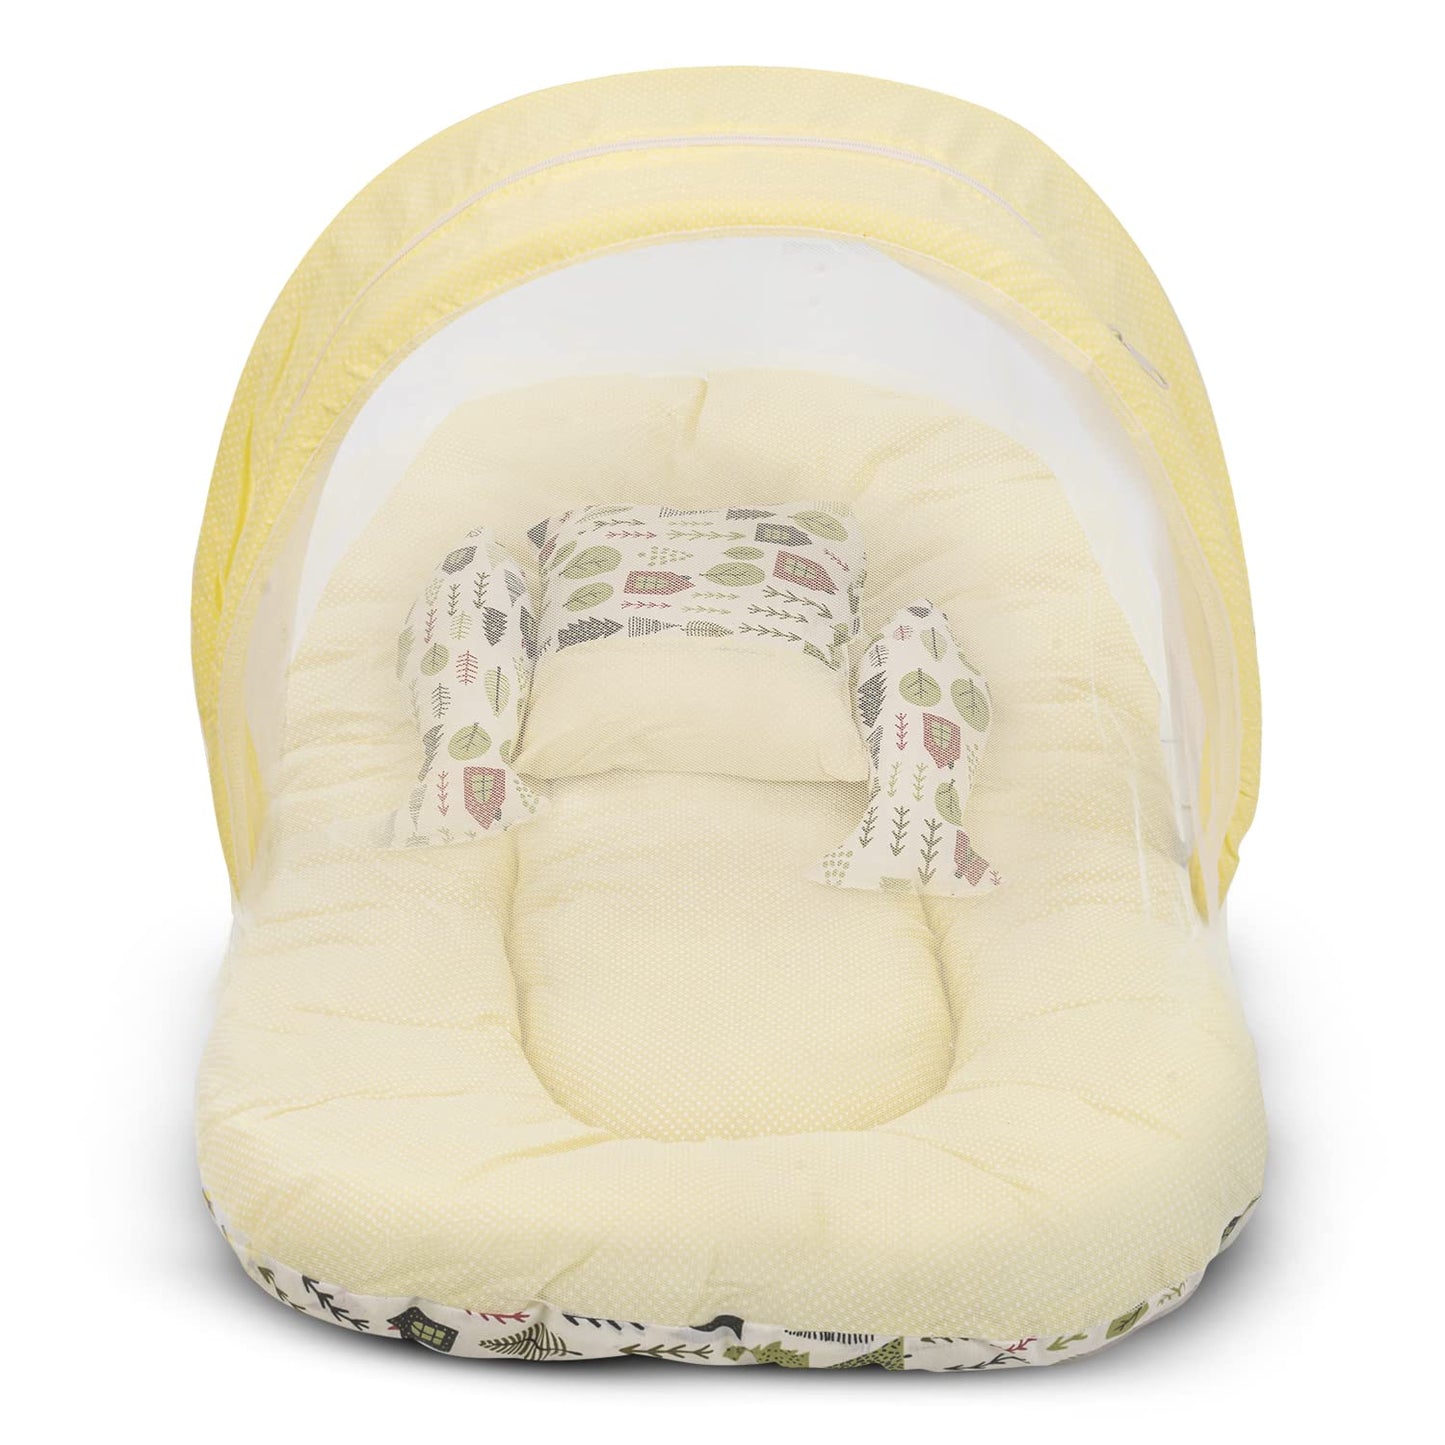 Baybee Baby Bedding Set for New Born Baby, Bed Mattress with Mosquito Net, Zip, Neck Pillow & 2 Bolsters